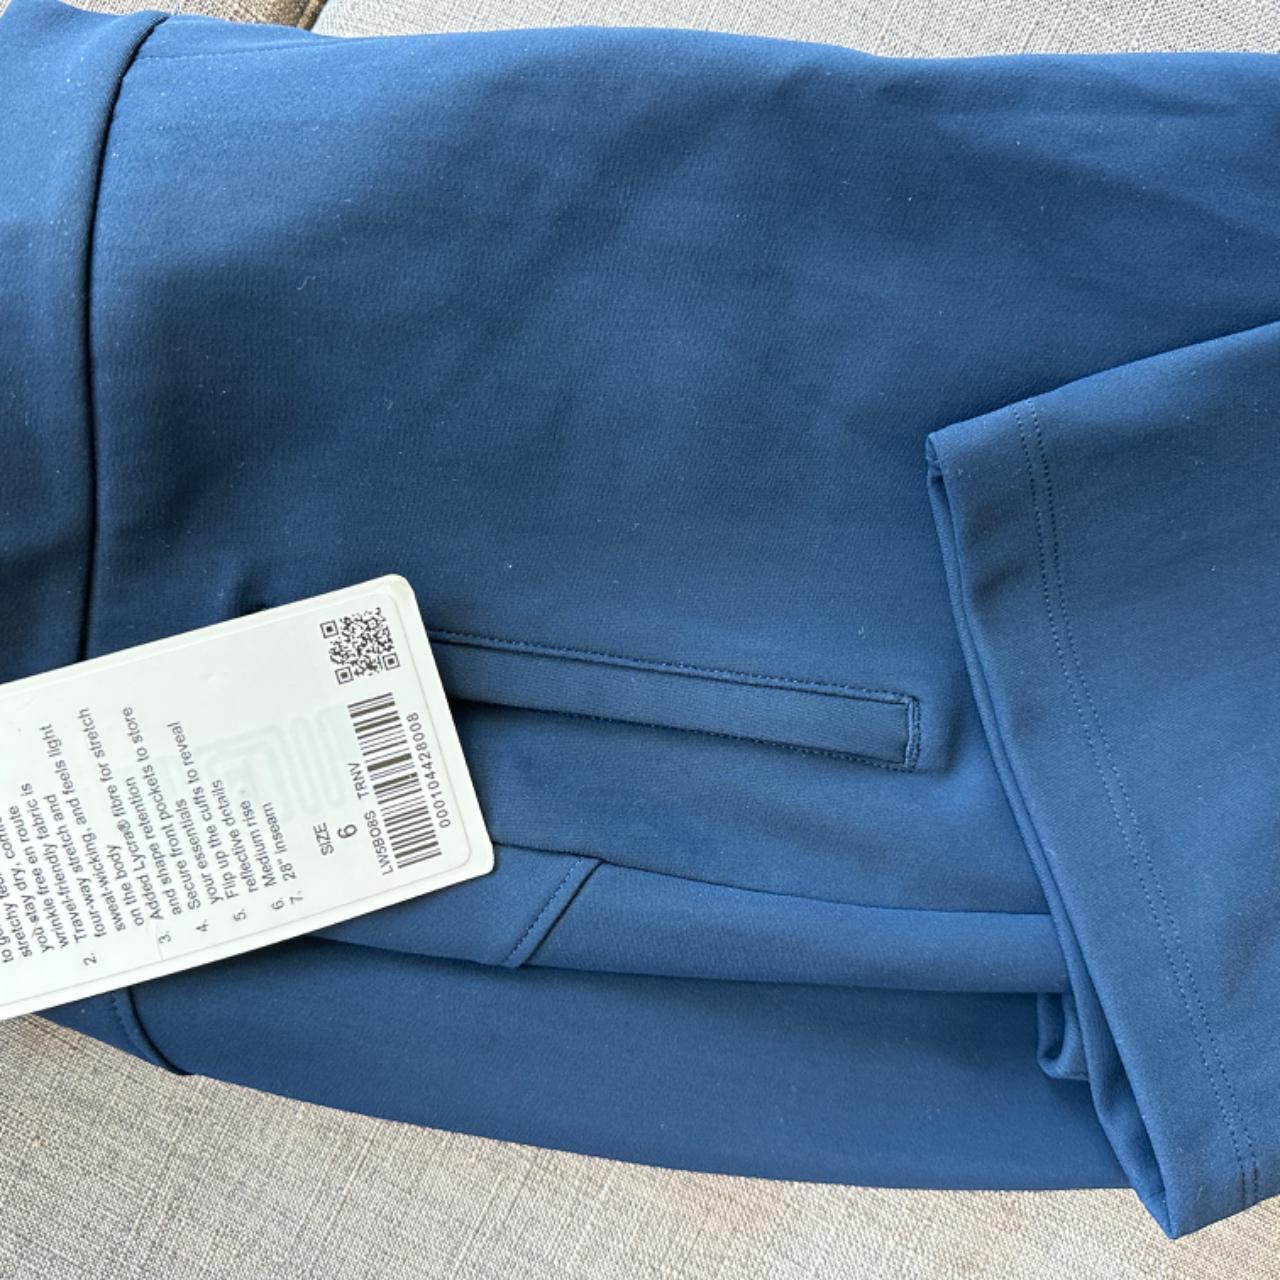 Lululemon On The Move Navy Trouser Pants 4 NWT Sold Out!